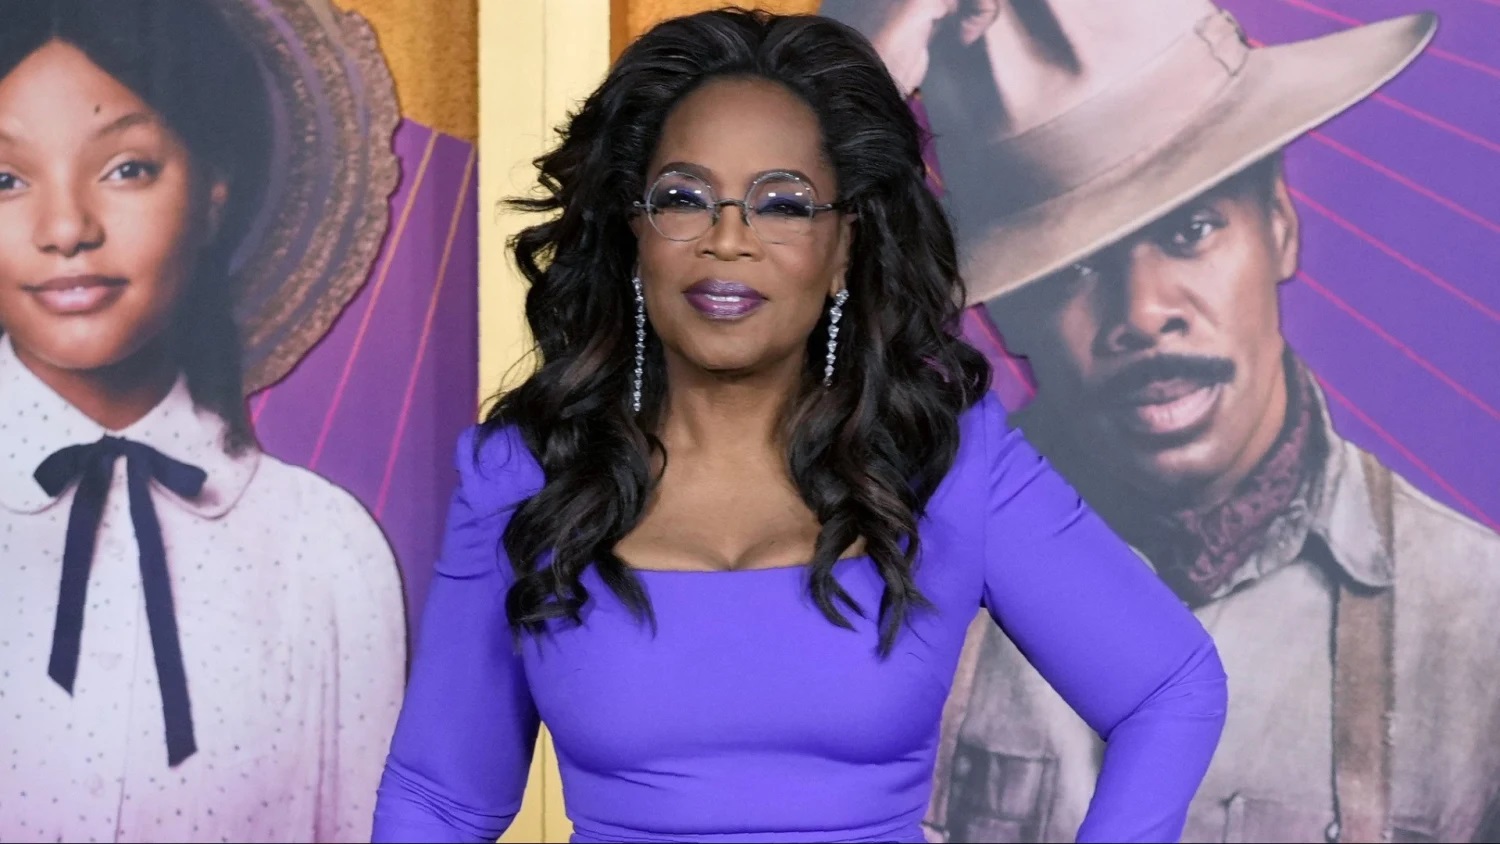 Oprah Winfrey Reveals Her Use Of Weight-Loss Medication For Maintenance After 40 Lb. Drop